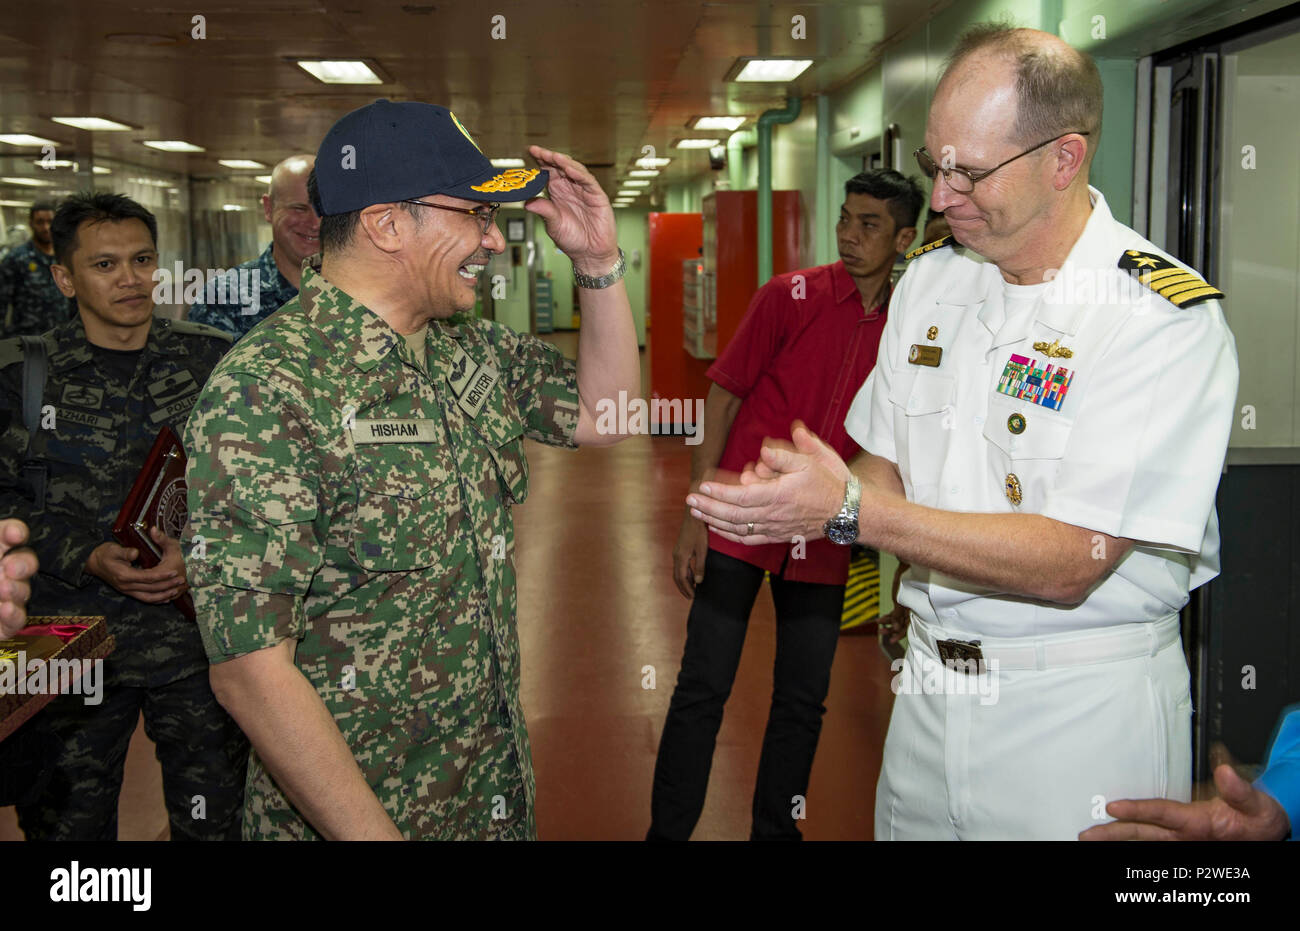 160804-N-QW941-350 KUANTAN, Malaysia (Aug 4, 2016) Capt. Tom Williams (right), mission commander, Pacific Partnership 2016, presents Dato’ Seri Hishammuddin Tun Hussein, Minister of Defense, Malaysia, with a Pacific Partnership hat prior to his departure of hospital ship USNS Mercy (T-AH 19). While aboard Mercy, Hishammuddin met with Pacific Partnership personnel, toured the ship and participated in a press conference. This is the first time Mercy and Pacific Partnership have visited Malaysia. During the mission stop partner nations work side-by-side with local military and civilian organizati Stock Photo